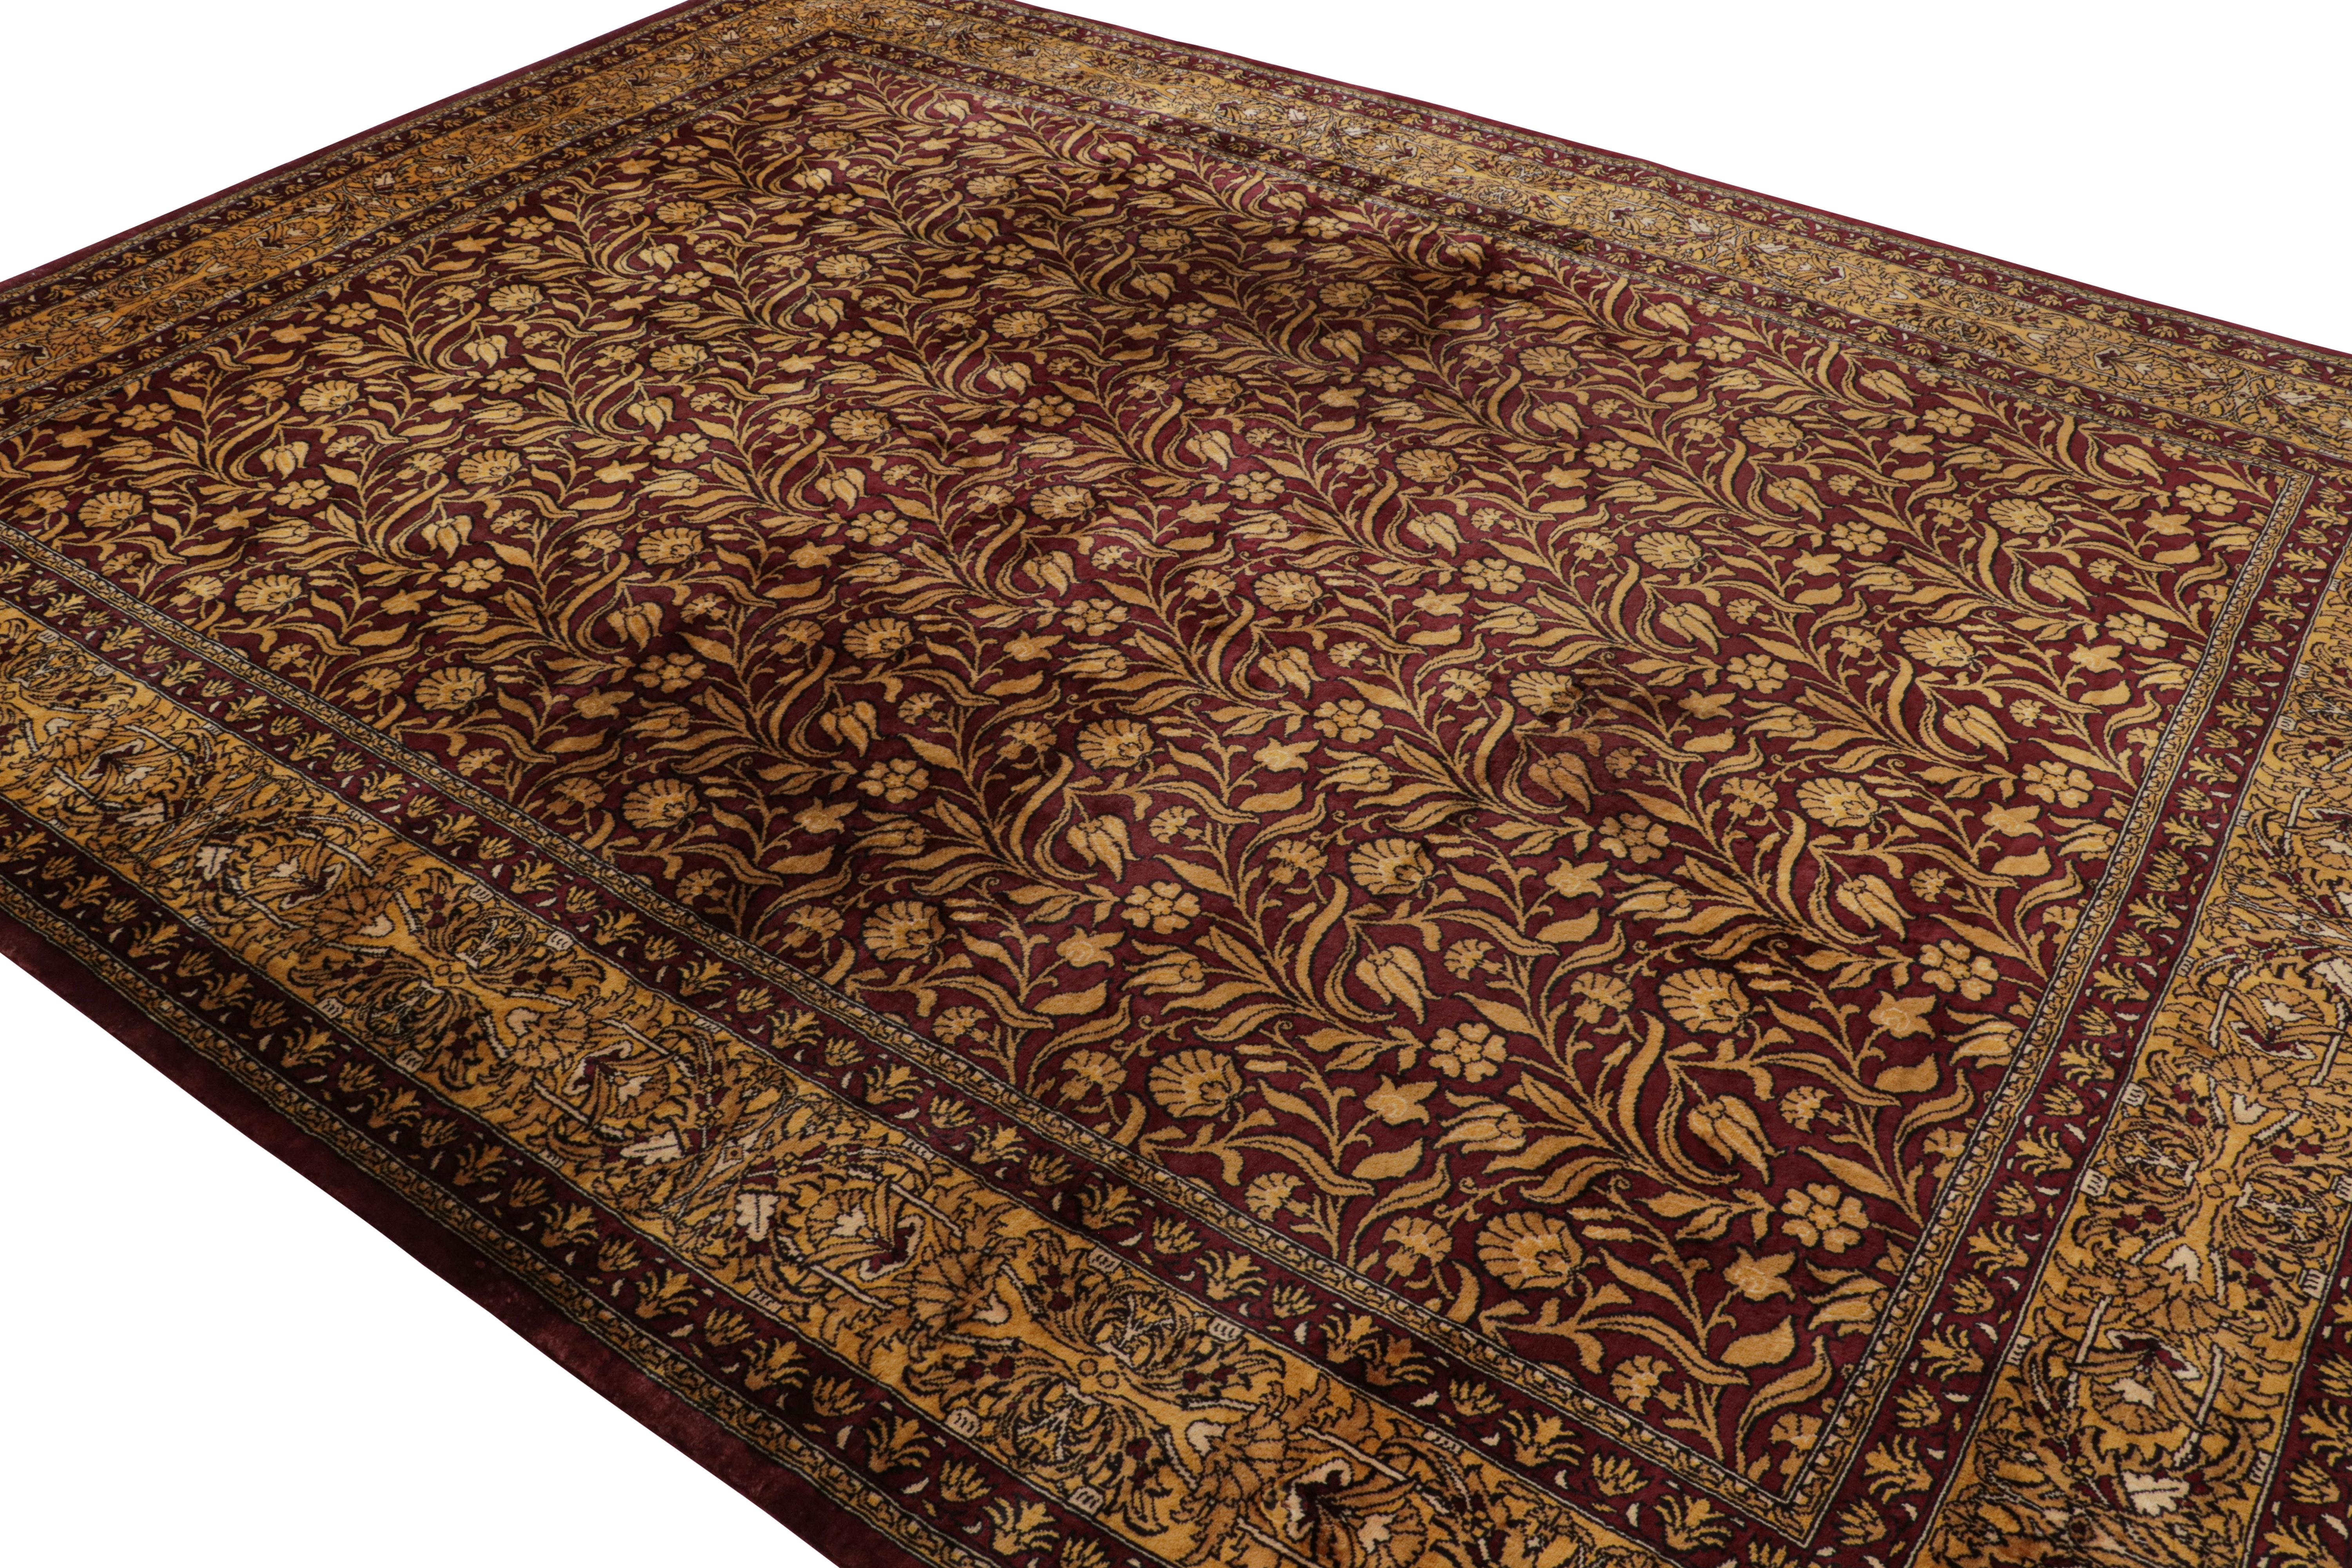 Handmade with wool, this 9x12 rug is inspired by a blend of European and Oriental rug aesthetics, with a particular influence from European interpretations of Persian rugs of Lavar. 

On the Design: 

Connoisseurs may admire the richest burgundy and